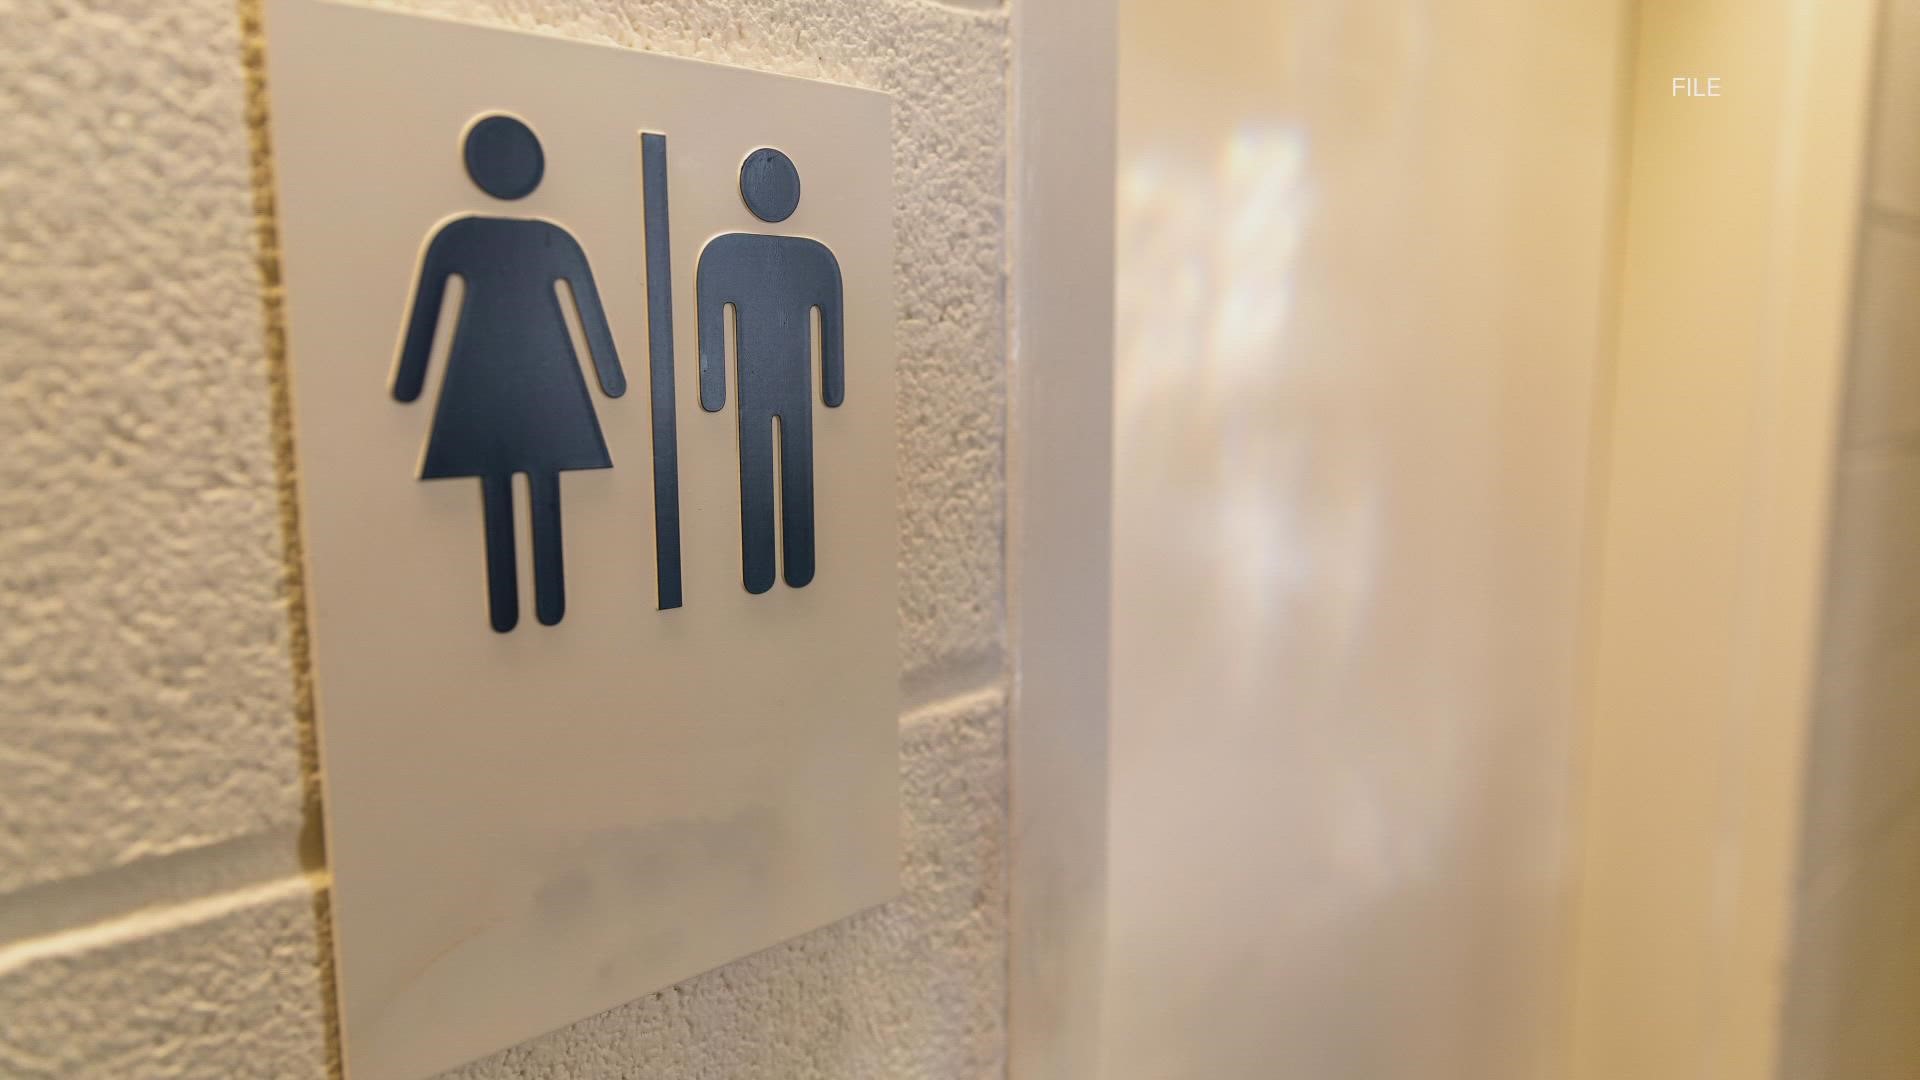 House Bill 30 would "ensure that student privacy exists in school restrooms, locker rooms, and shower rooms."